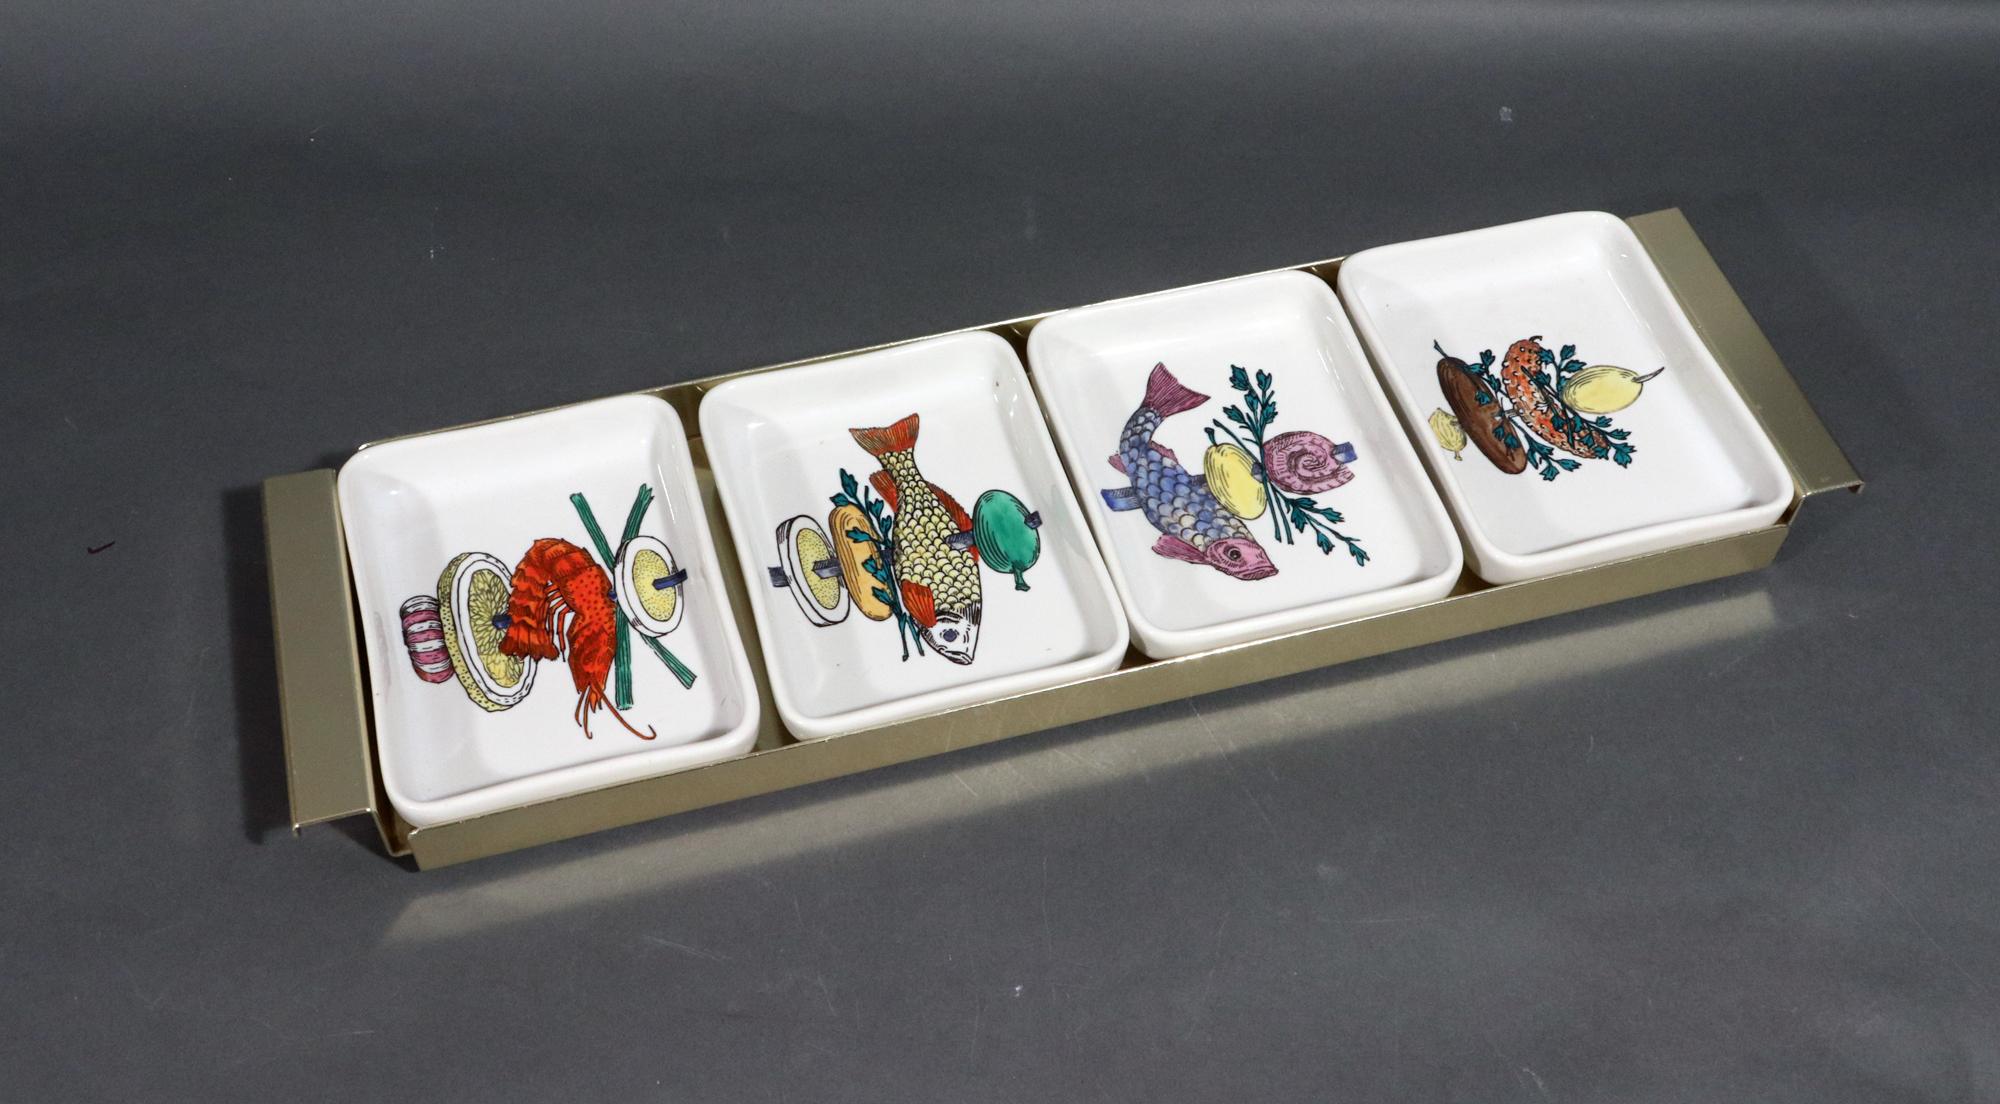 Piero Fornasetti Ceramic Appetizer Fish Kebab Dishes and Serving Tray,
1960s

There are four ceramic deep rectangular dishes placed in a long rectangular gold metal tray with handles at each end.
The trays together display a single large fish kebab